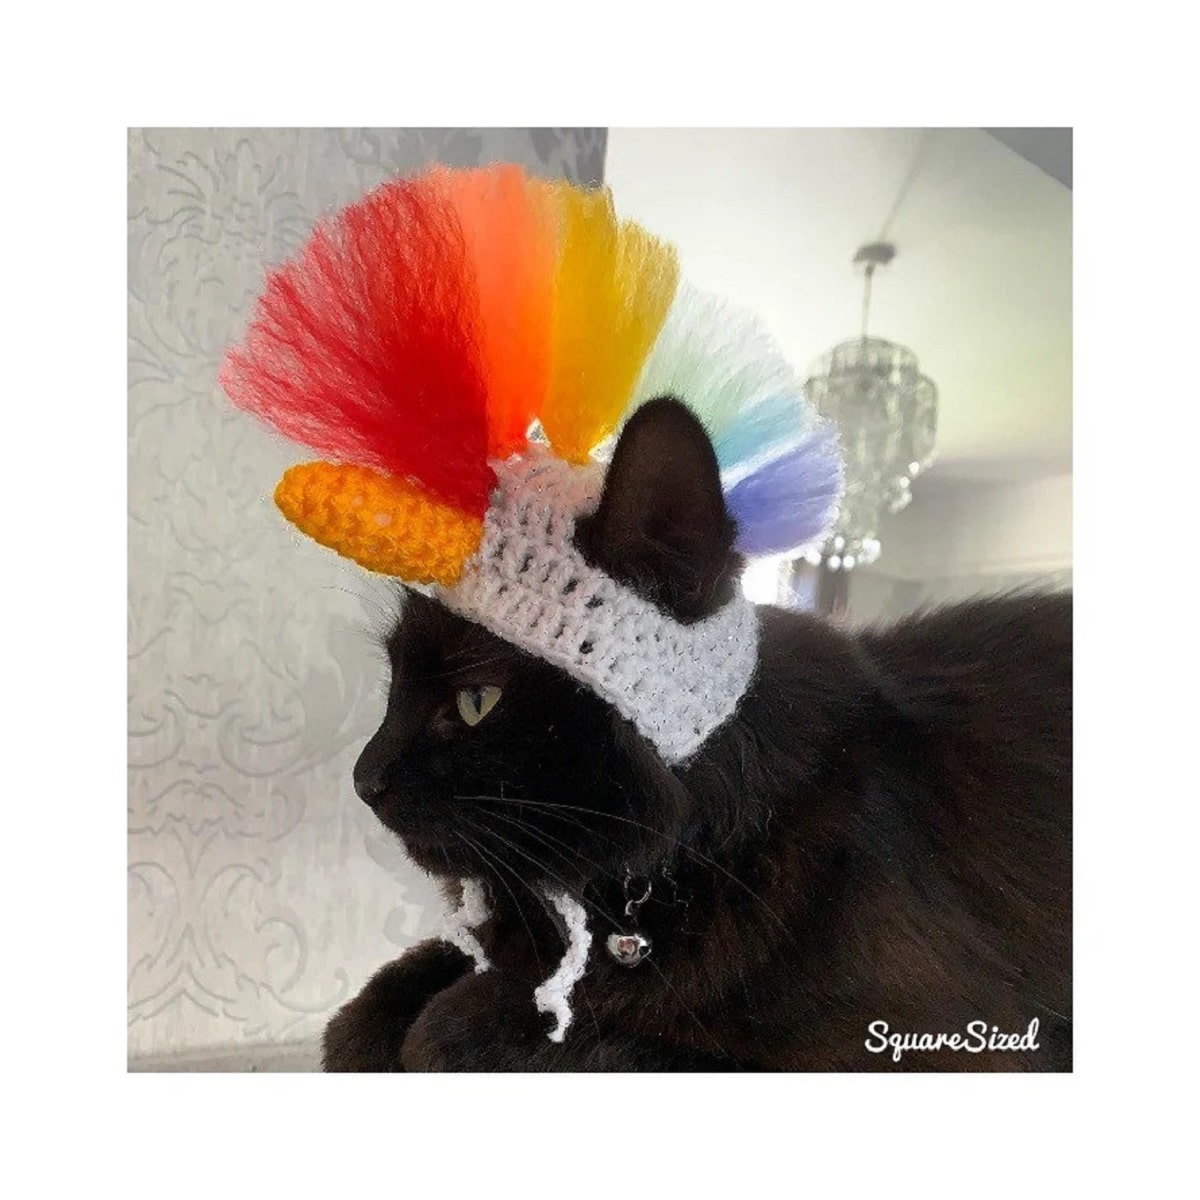 A black cat facing sideways wearing a white crochet hat with an orange horn and a multicolored mohawk on top